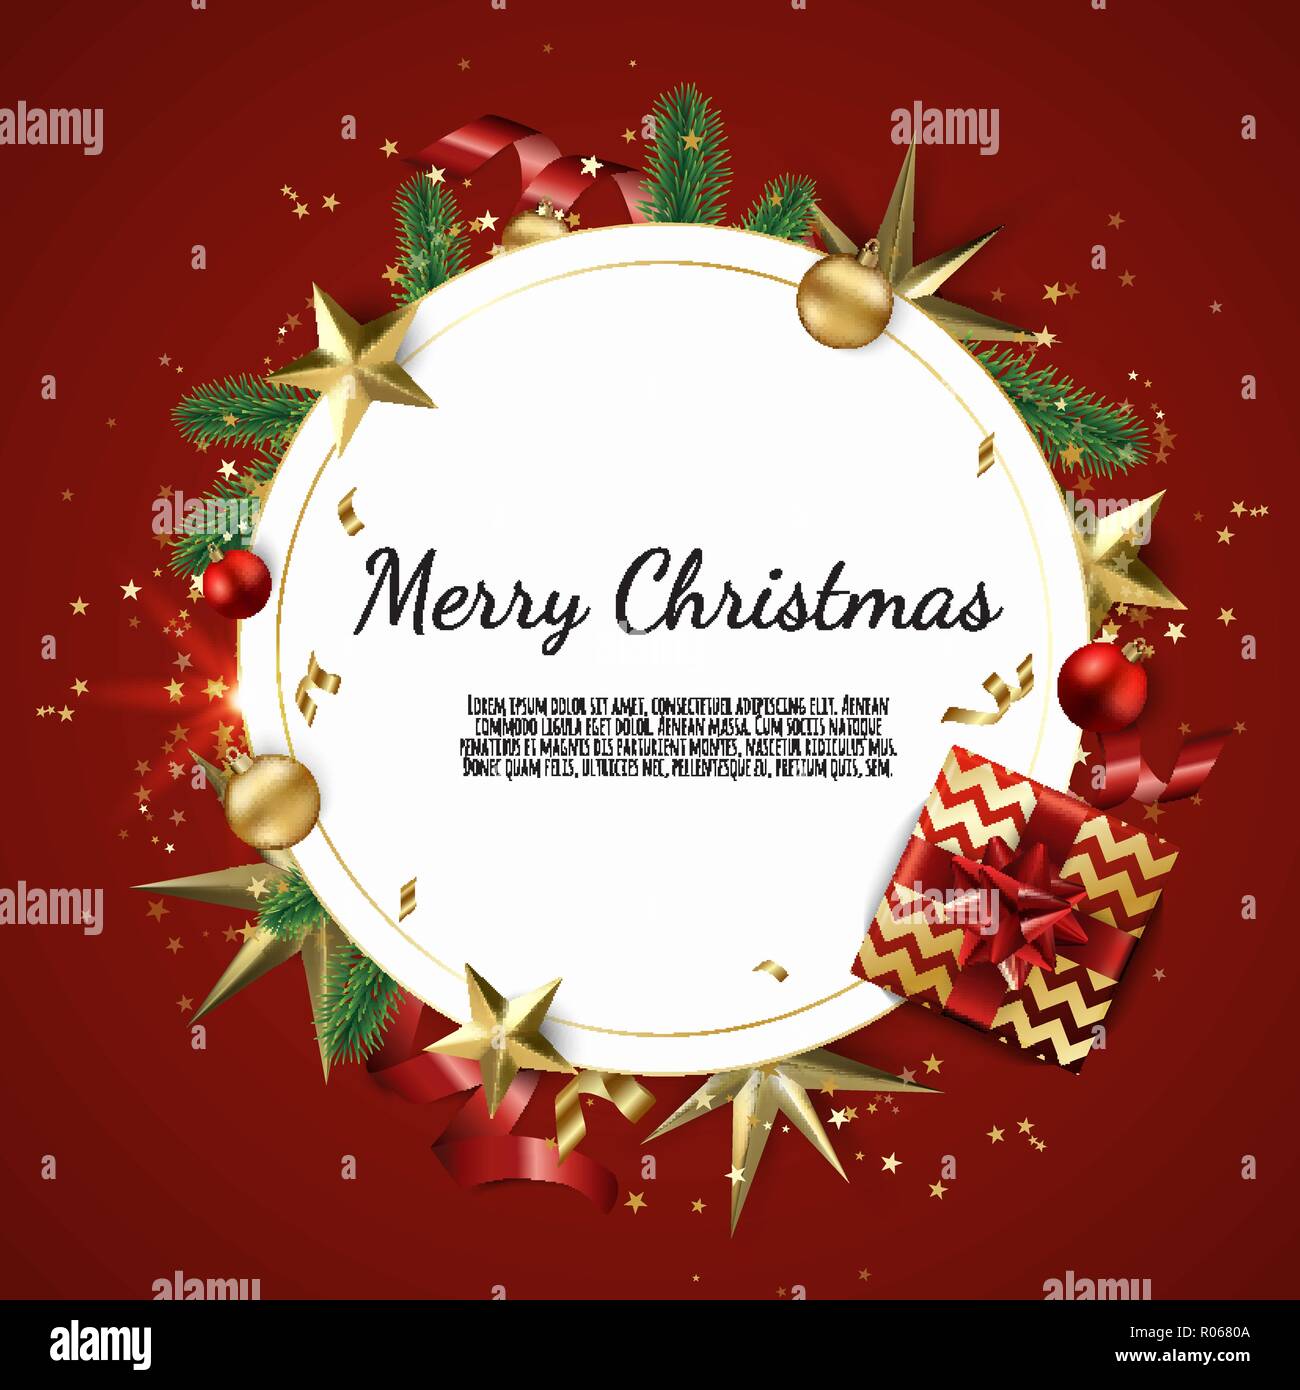 Vector Merry Christmas And Happy New Year background with golden star, balls, fir tree branches, snowflakes Stock Vector